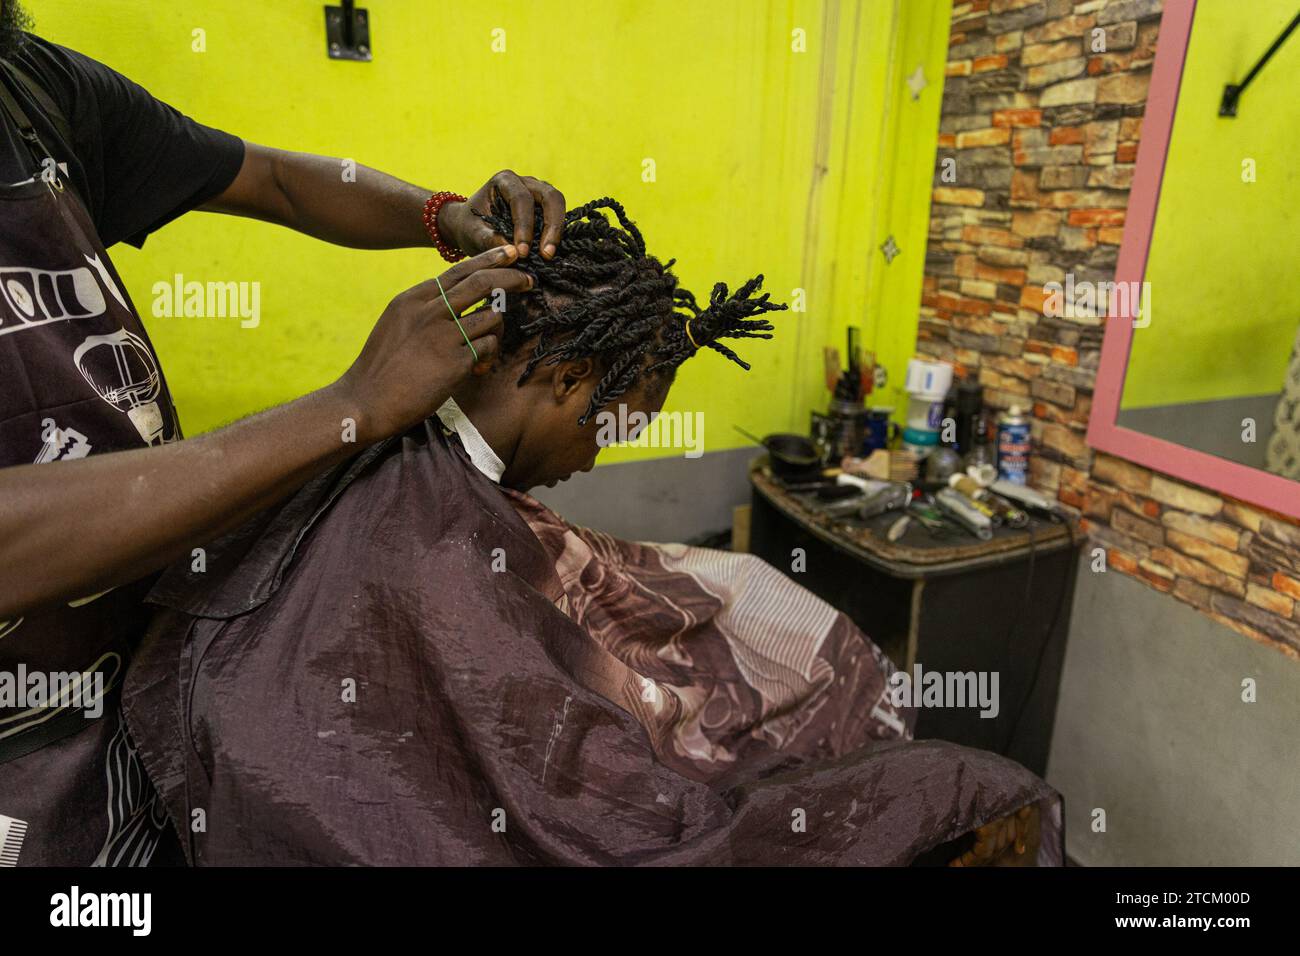 A barber fixes his client's braids inside his barbershop. Stock Photo